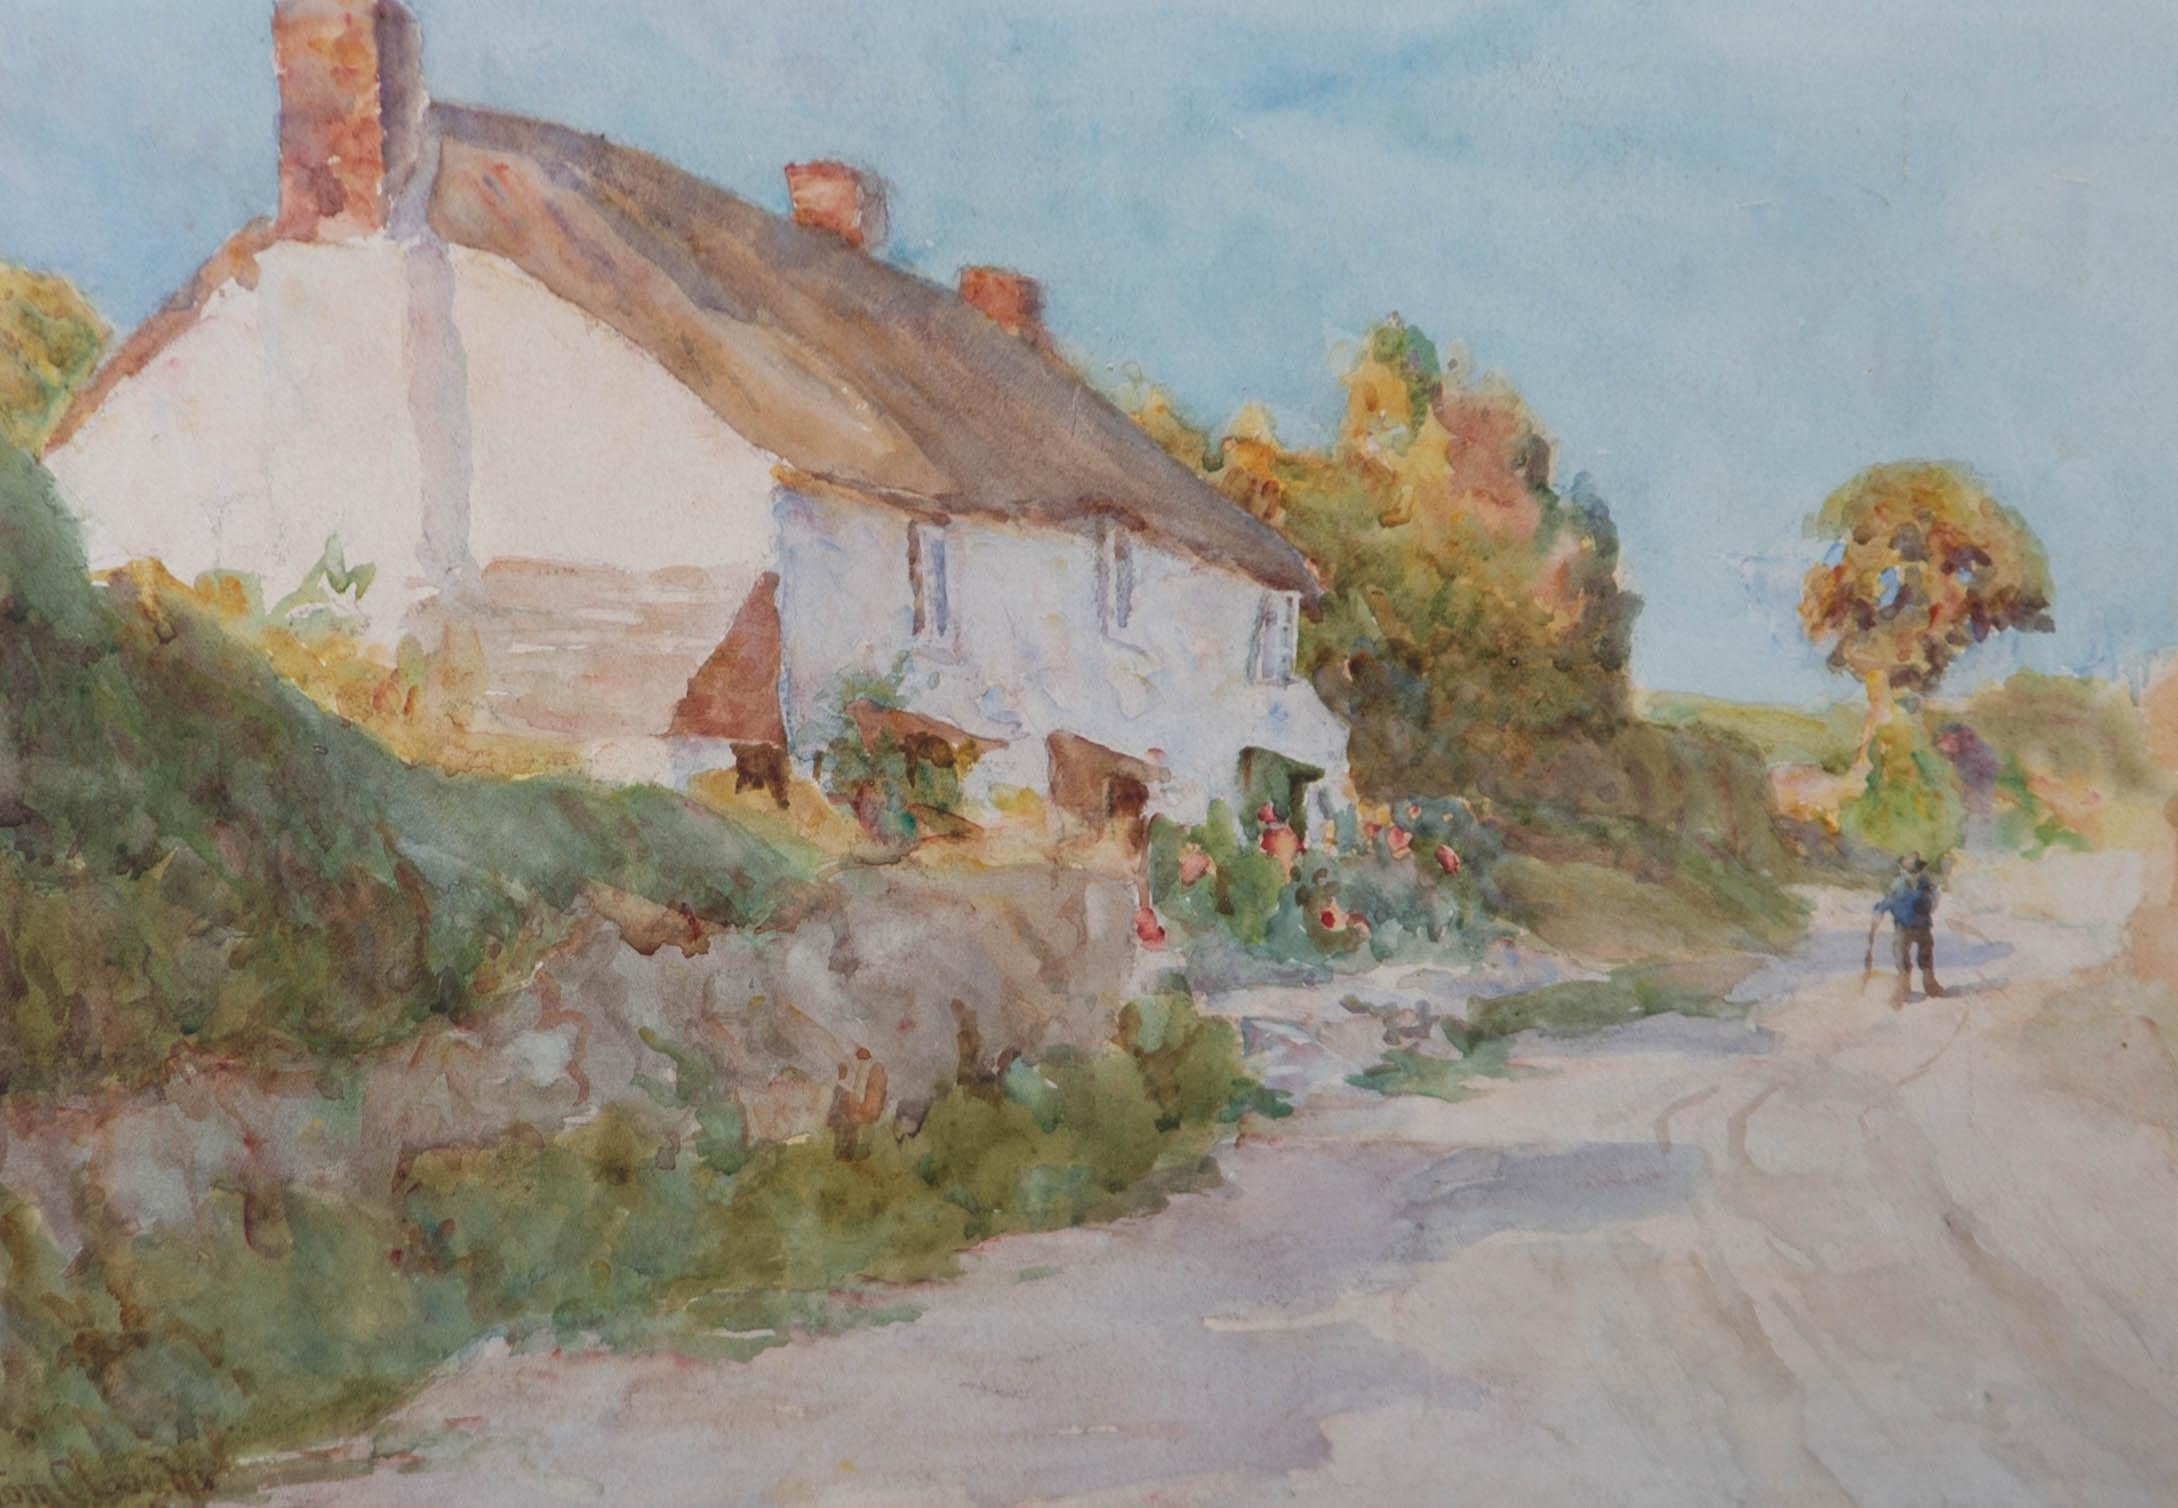 Tom Clough (1867-1943) - Turn of the Century Watercolour, A Country Lane 4